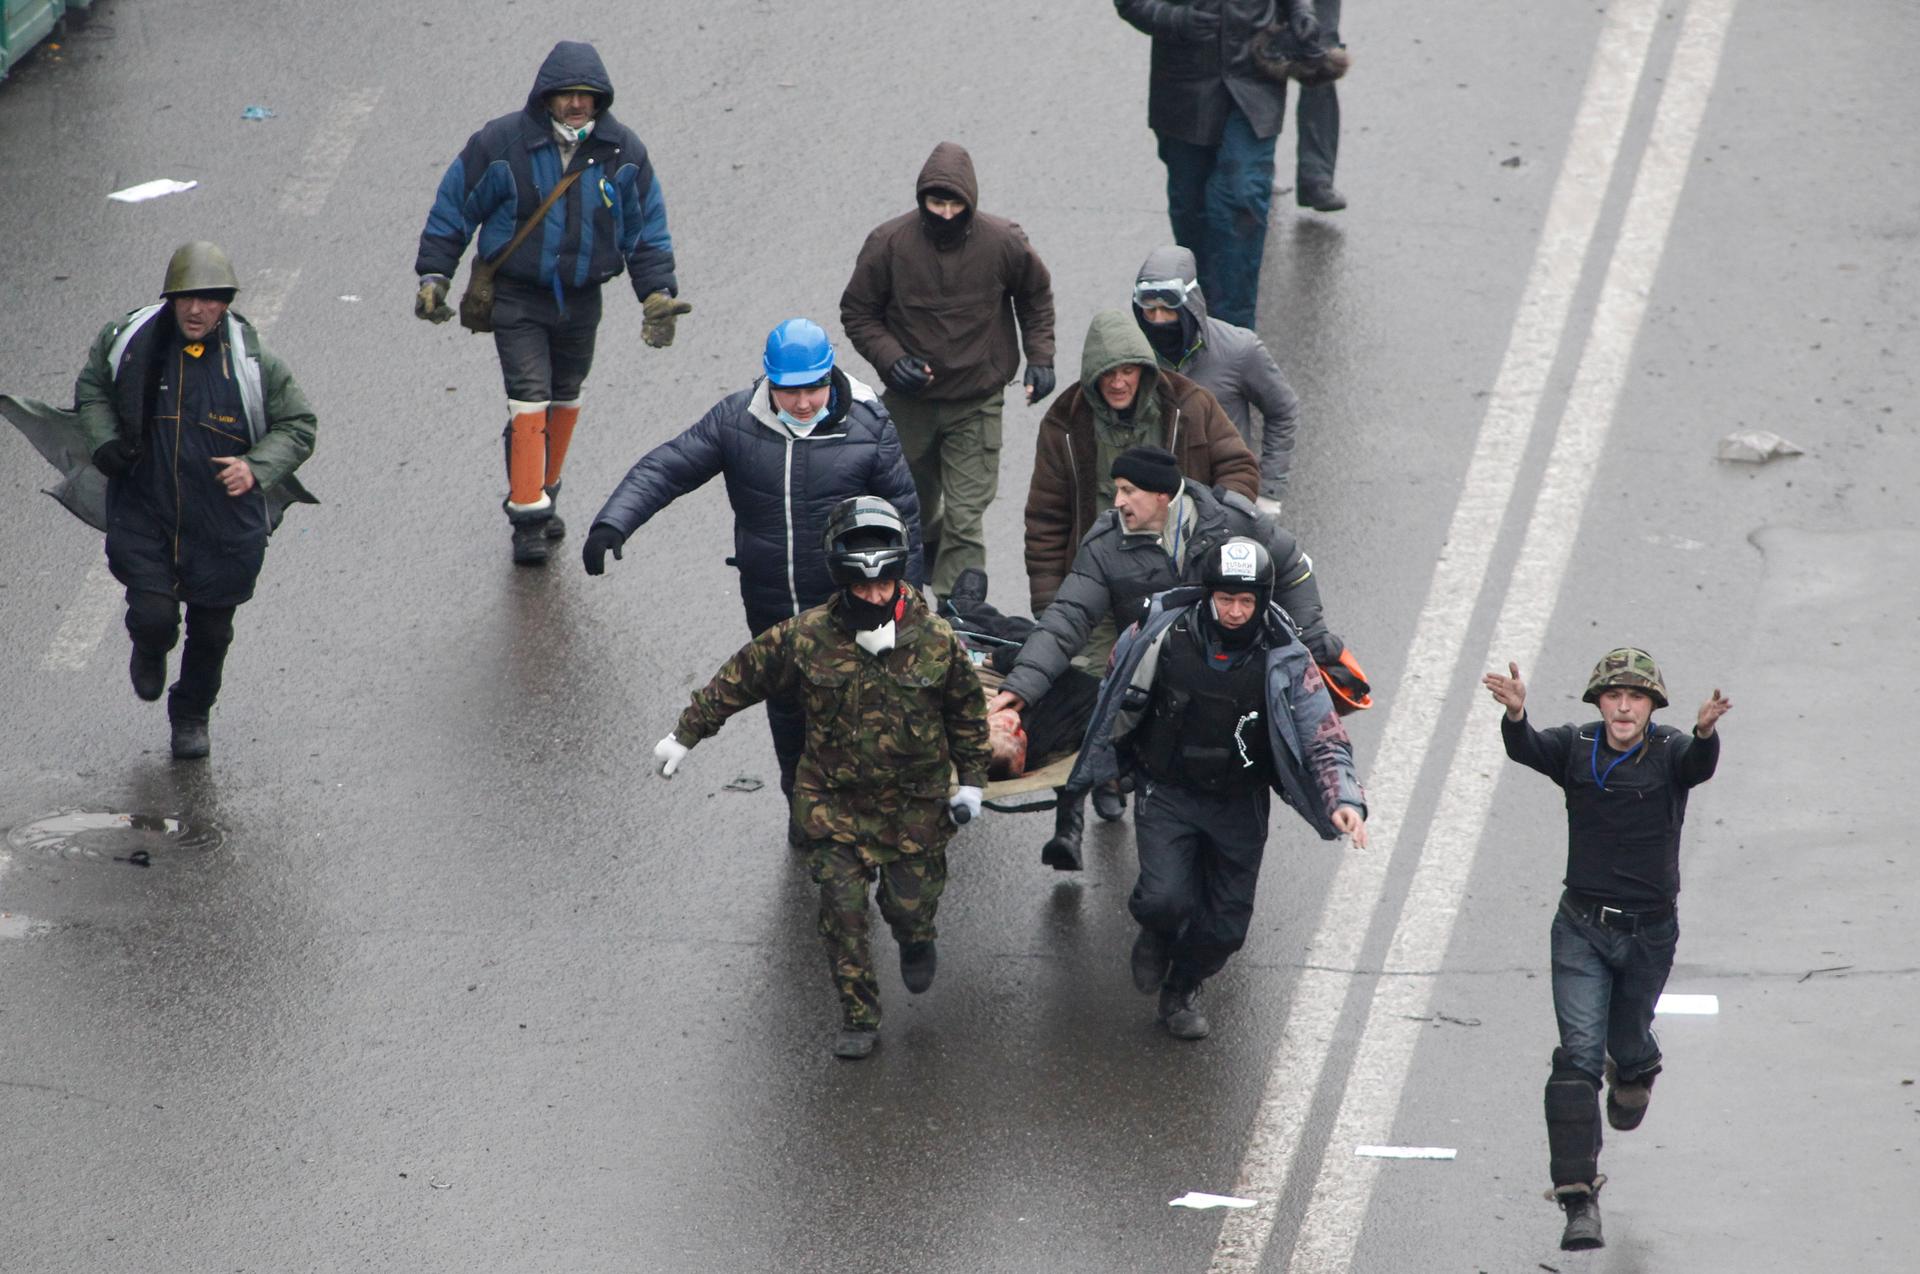 Anti-government protesters run with an injured man on a stretcher in downtown Kiev, February 20, 2014.  